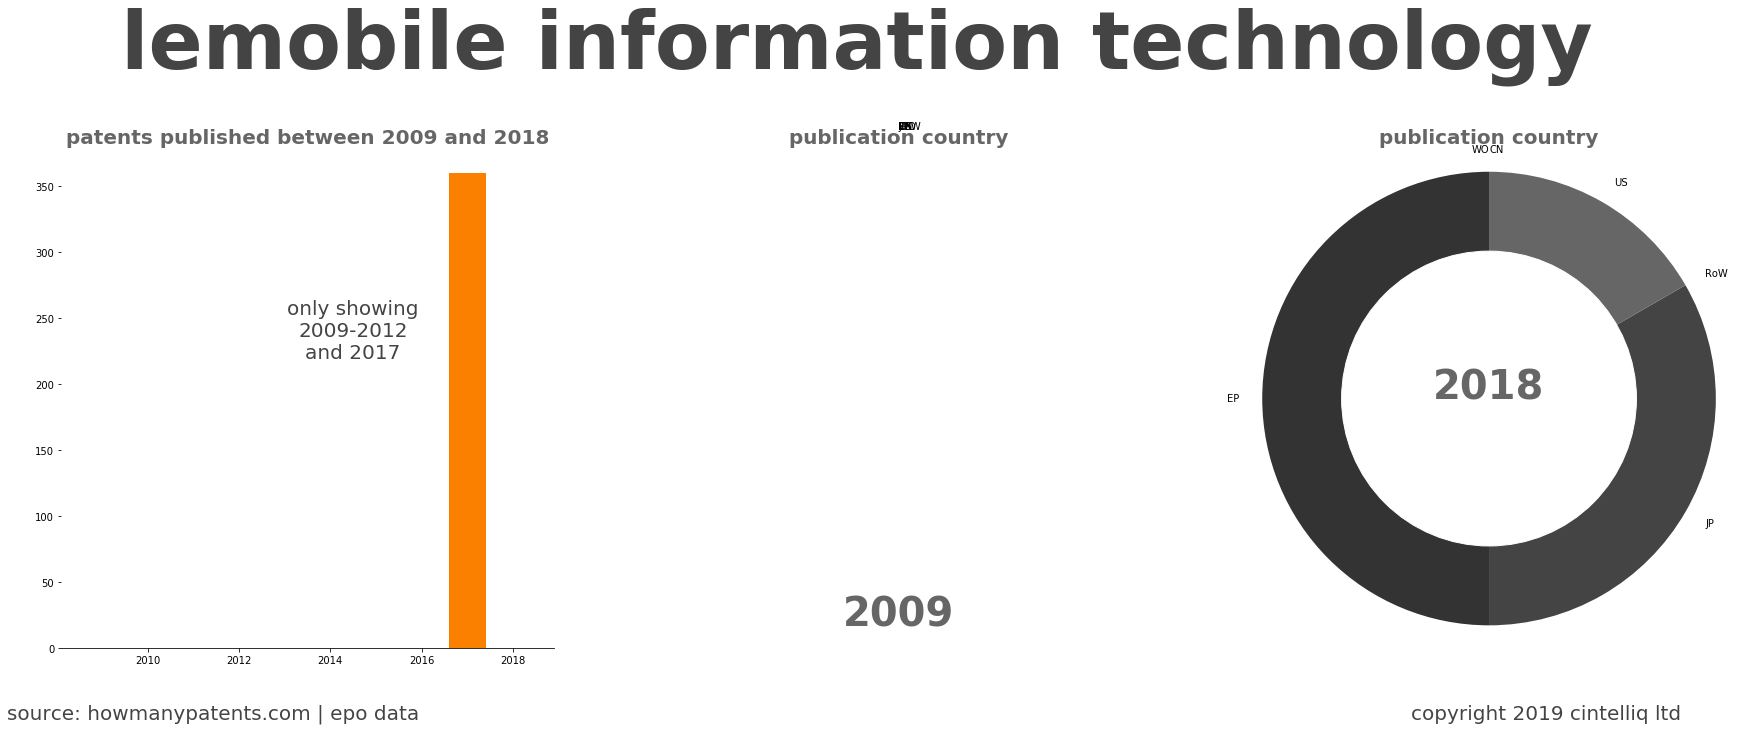 summary of patents for Lemobile Information Technology 